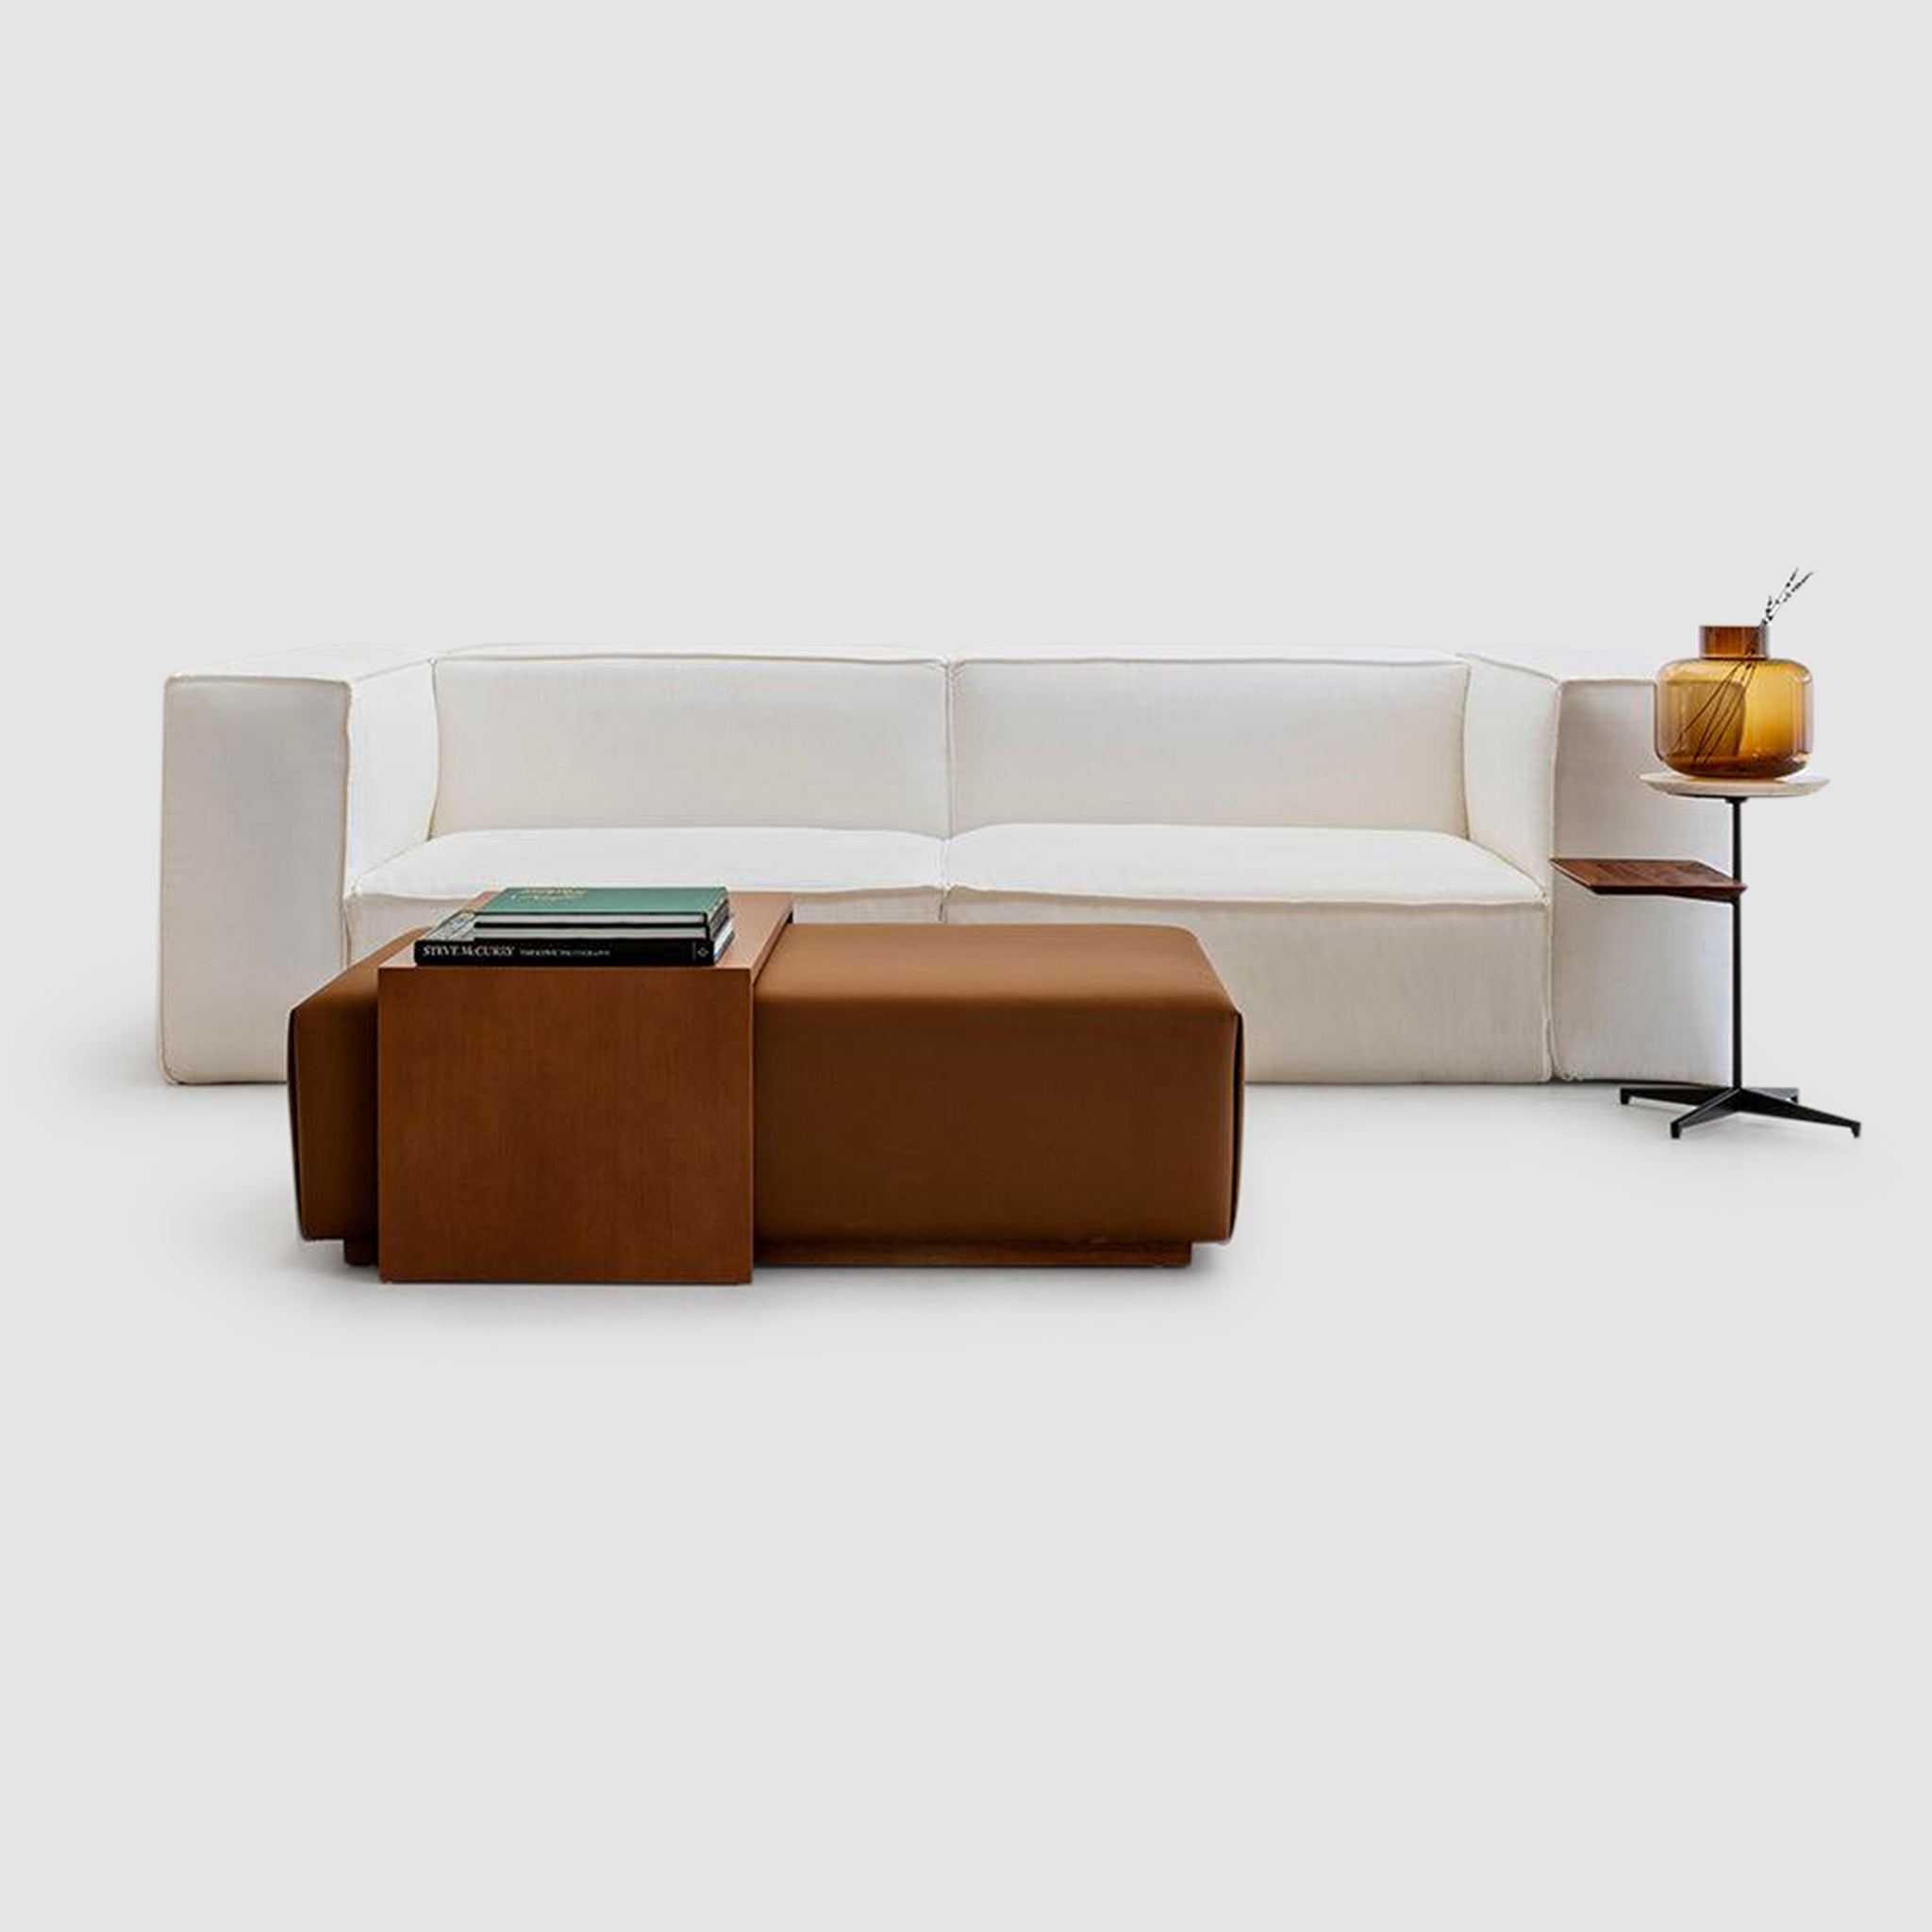 Relaxing living room setup with a white couch, brown ottoman, and side table for a comfortable and stylish space.